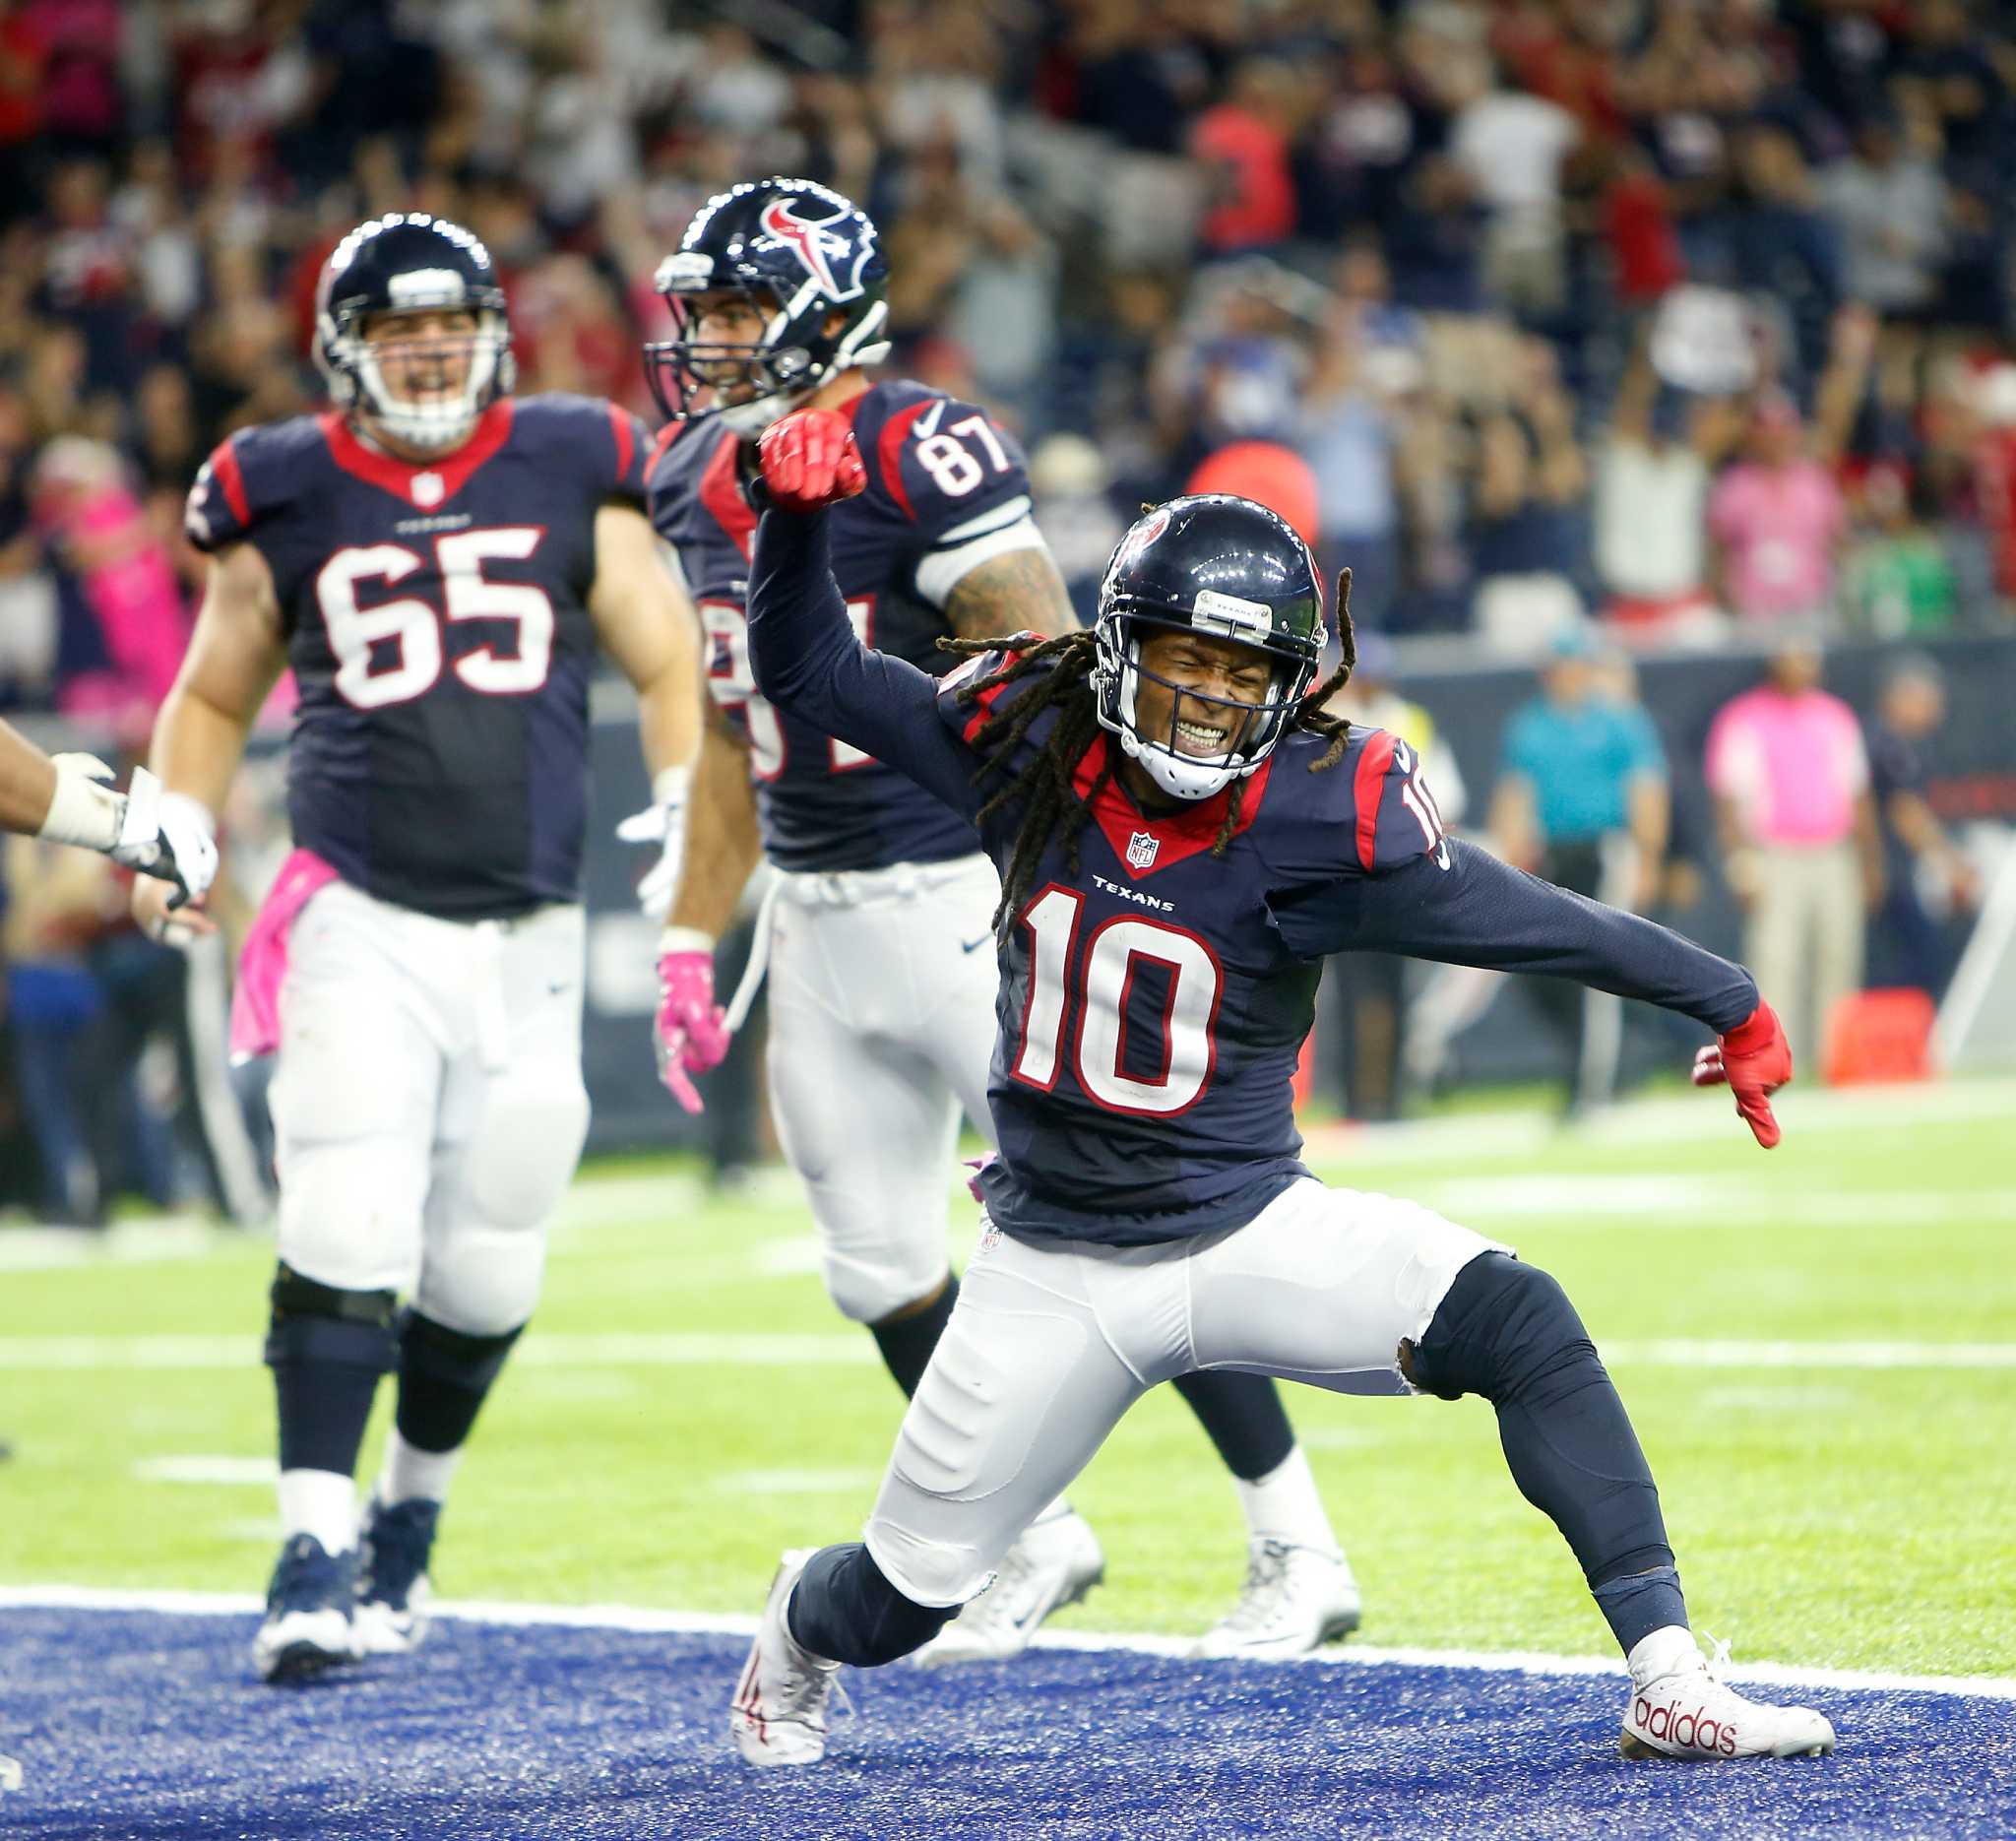 Fourth-quarter comeback an encouraging sign for Osweiler, Texans